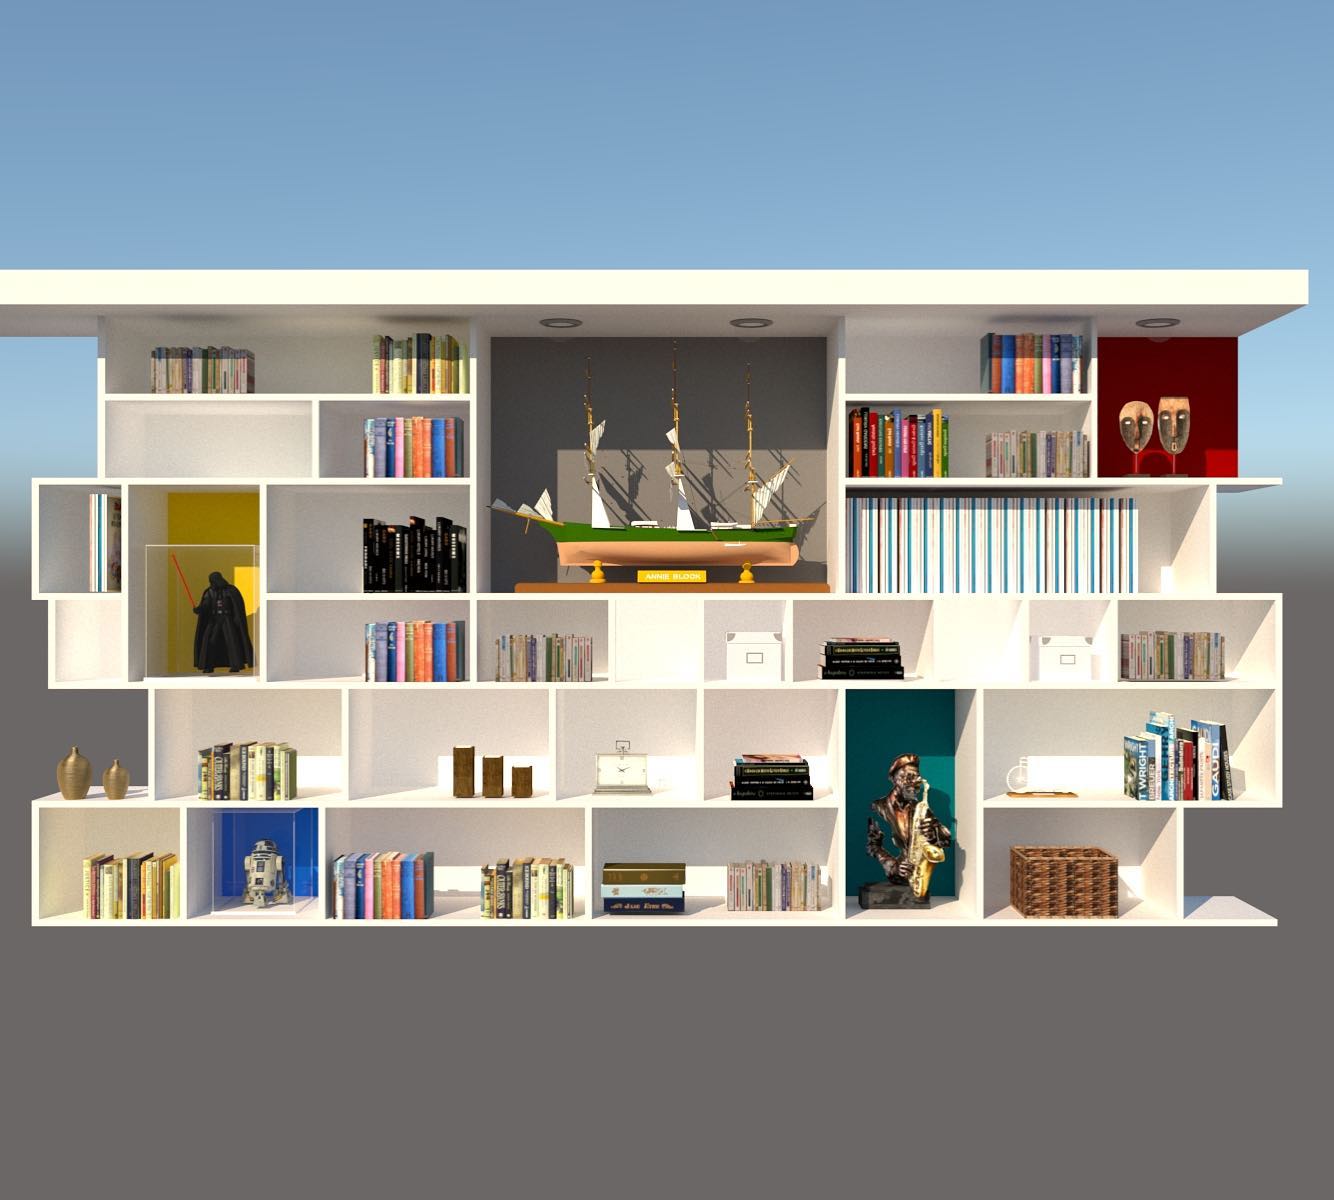 Planning the new bookshelves for the office, think we nailed the configuration